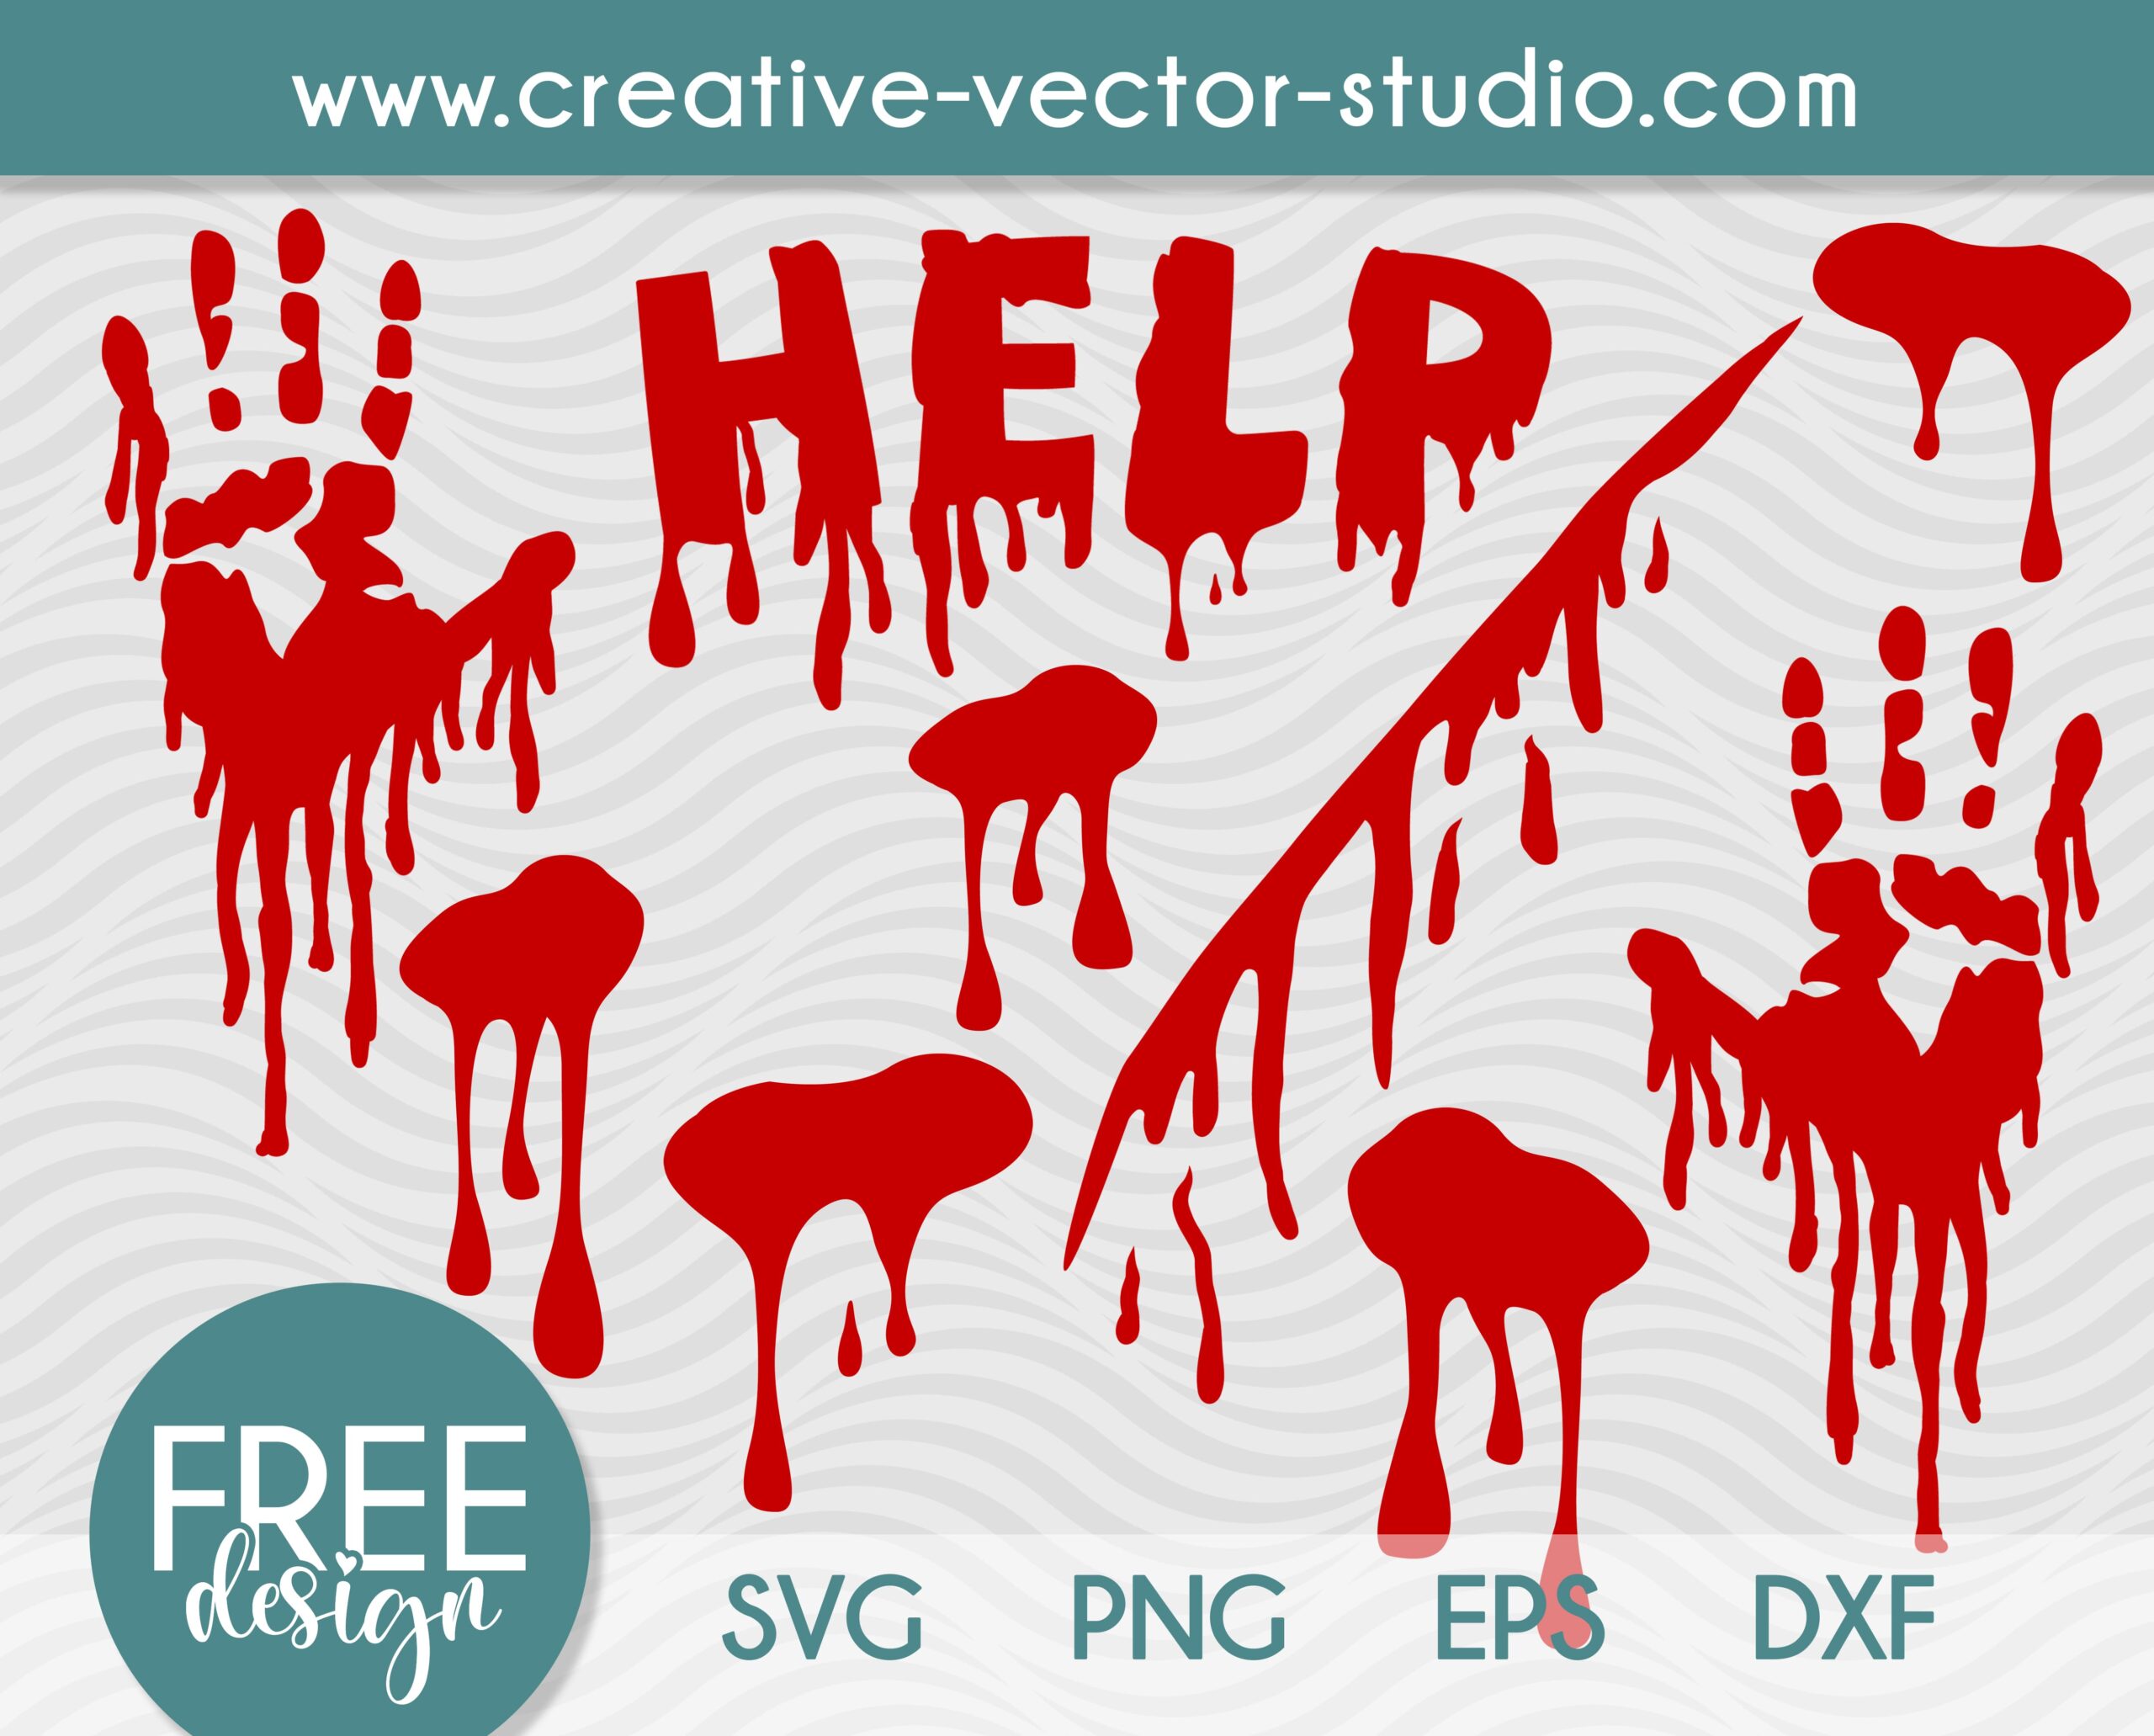 Free Blood Dripping SVG, PNG, DXF, EPS - Creative Vector Studio